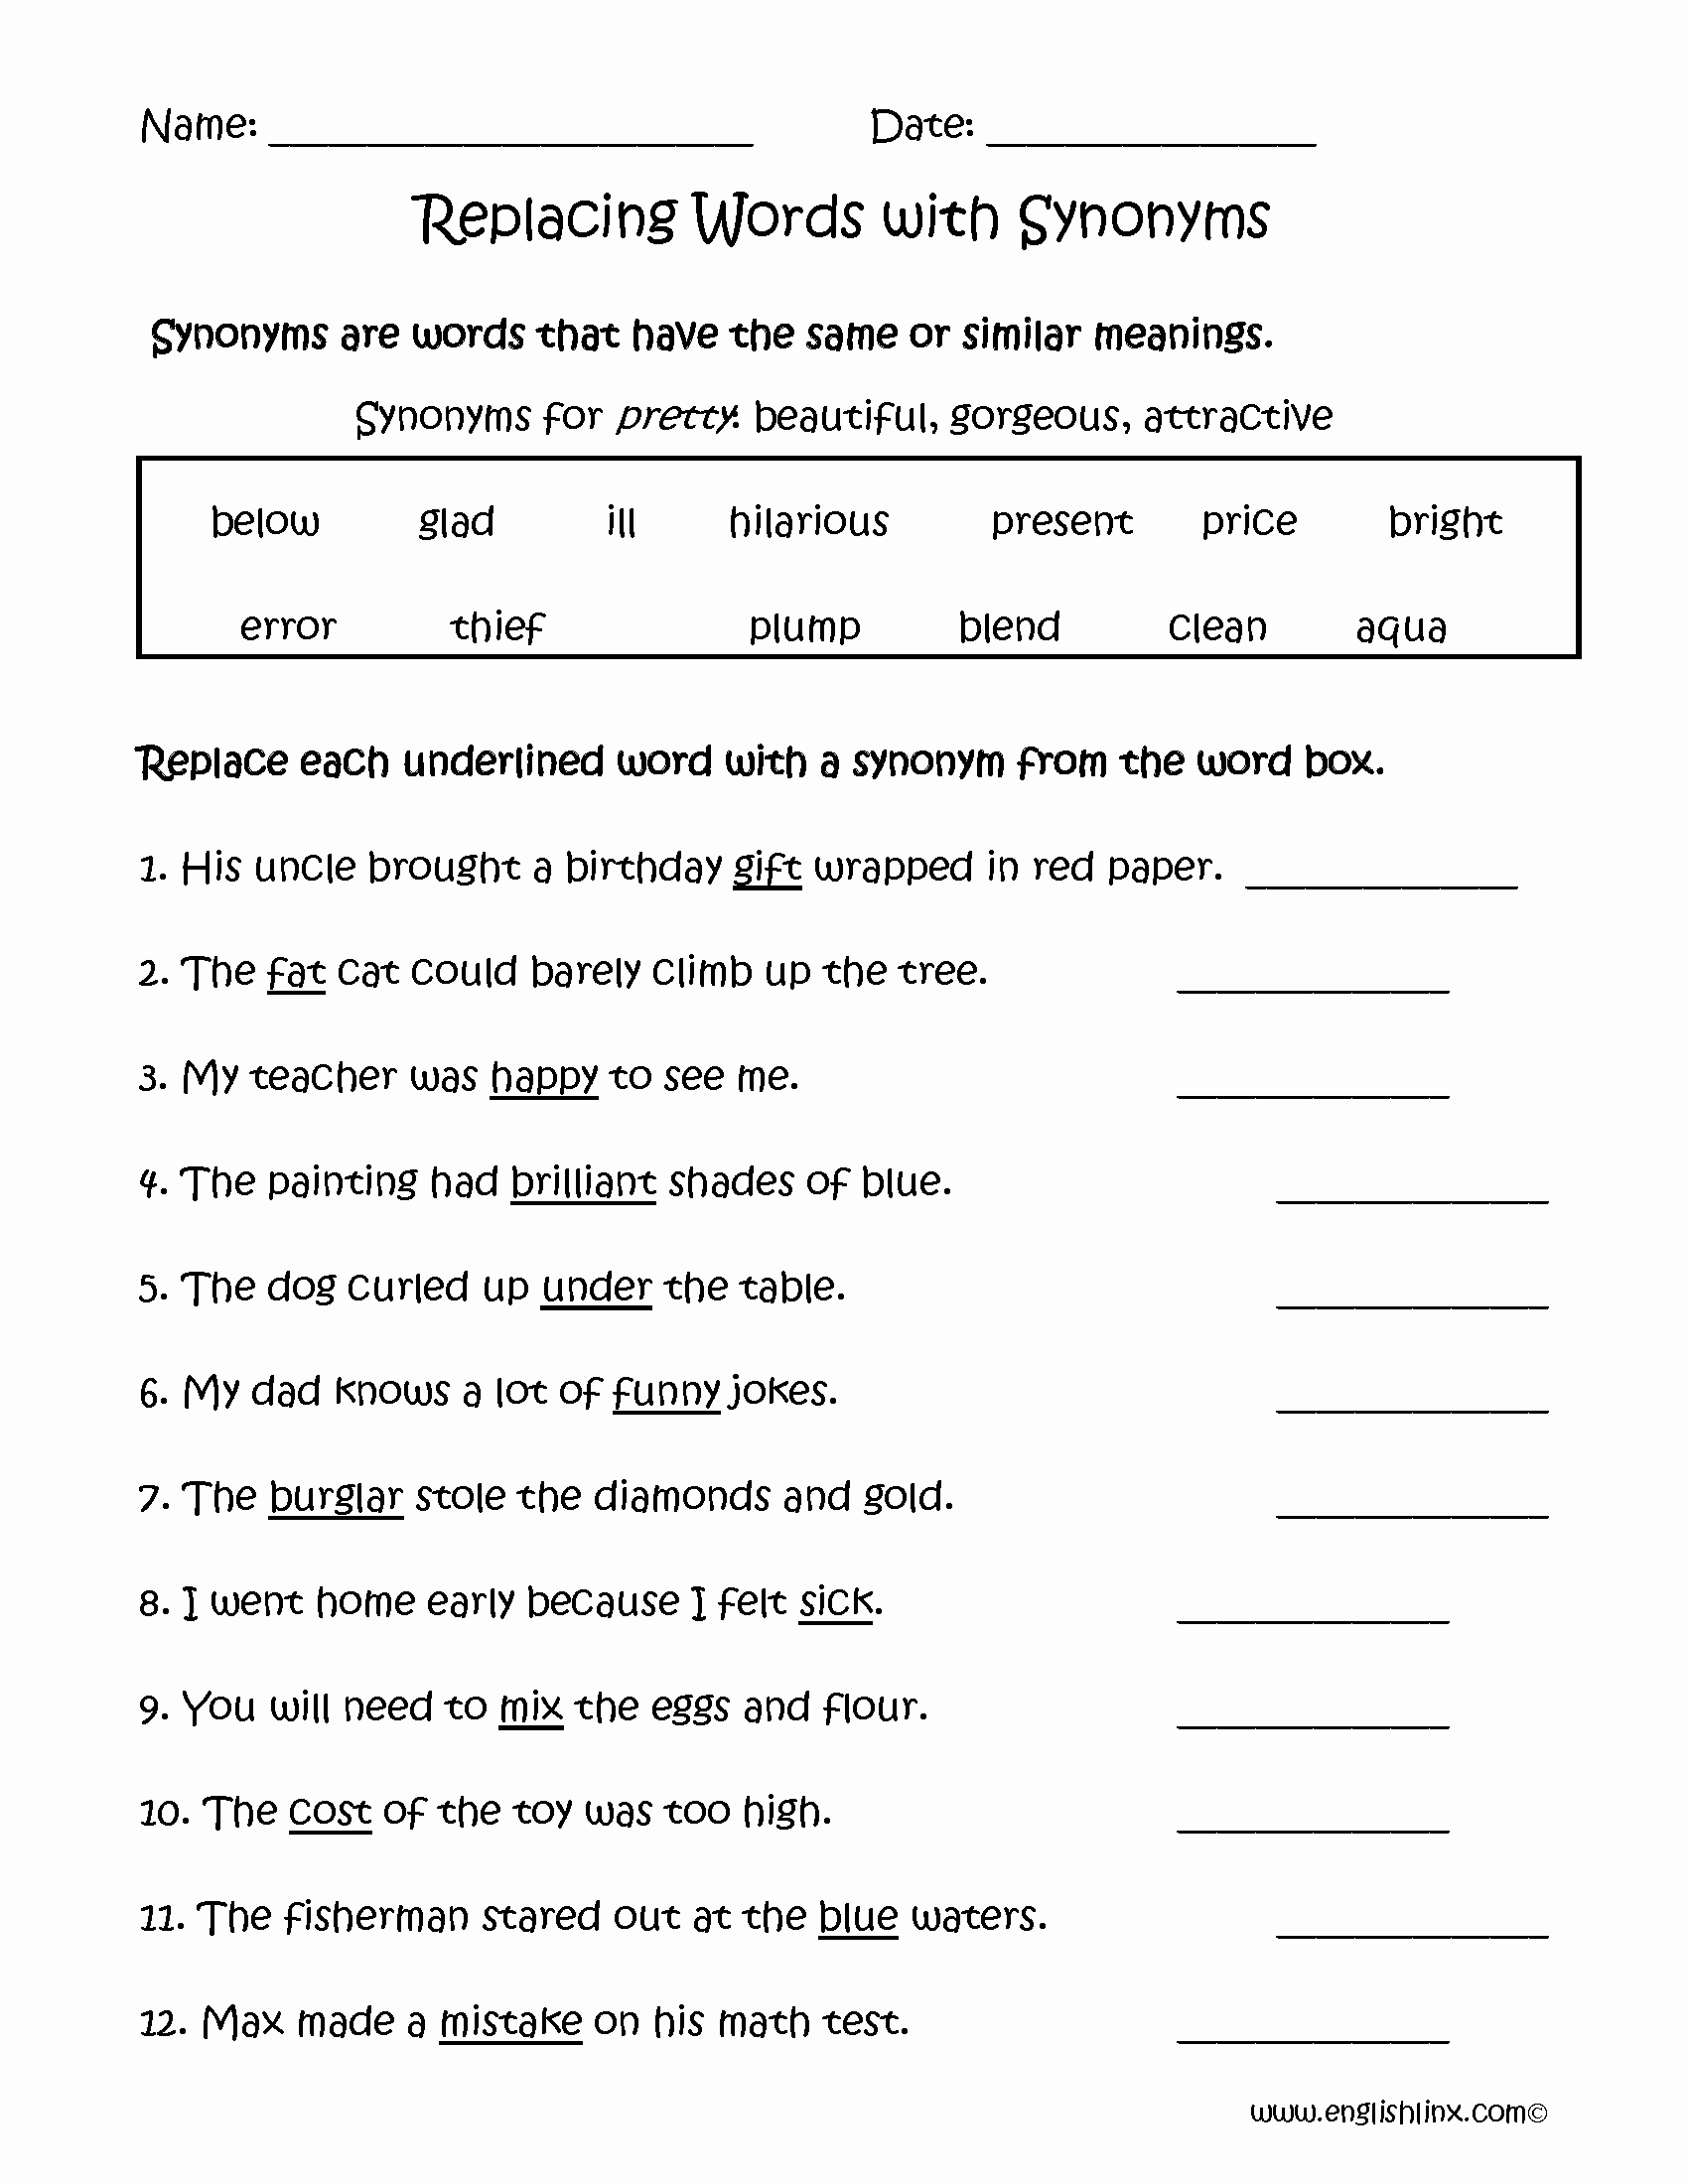 2nd Grade Vocabulary Worksheet Fresh Replacing Words with Synonyms Worksheets